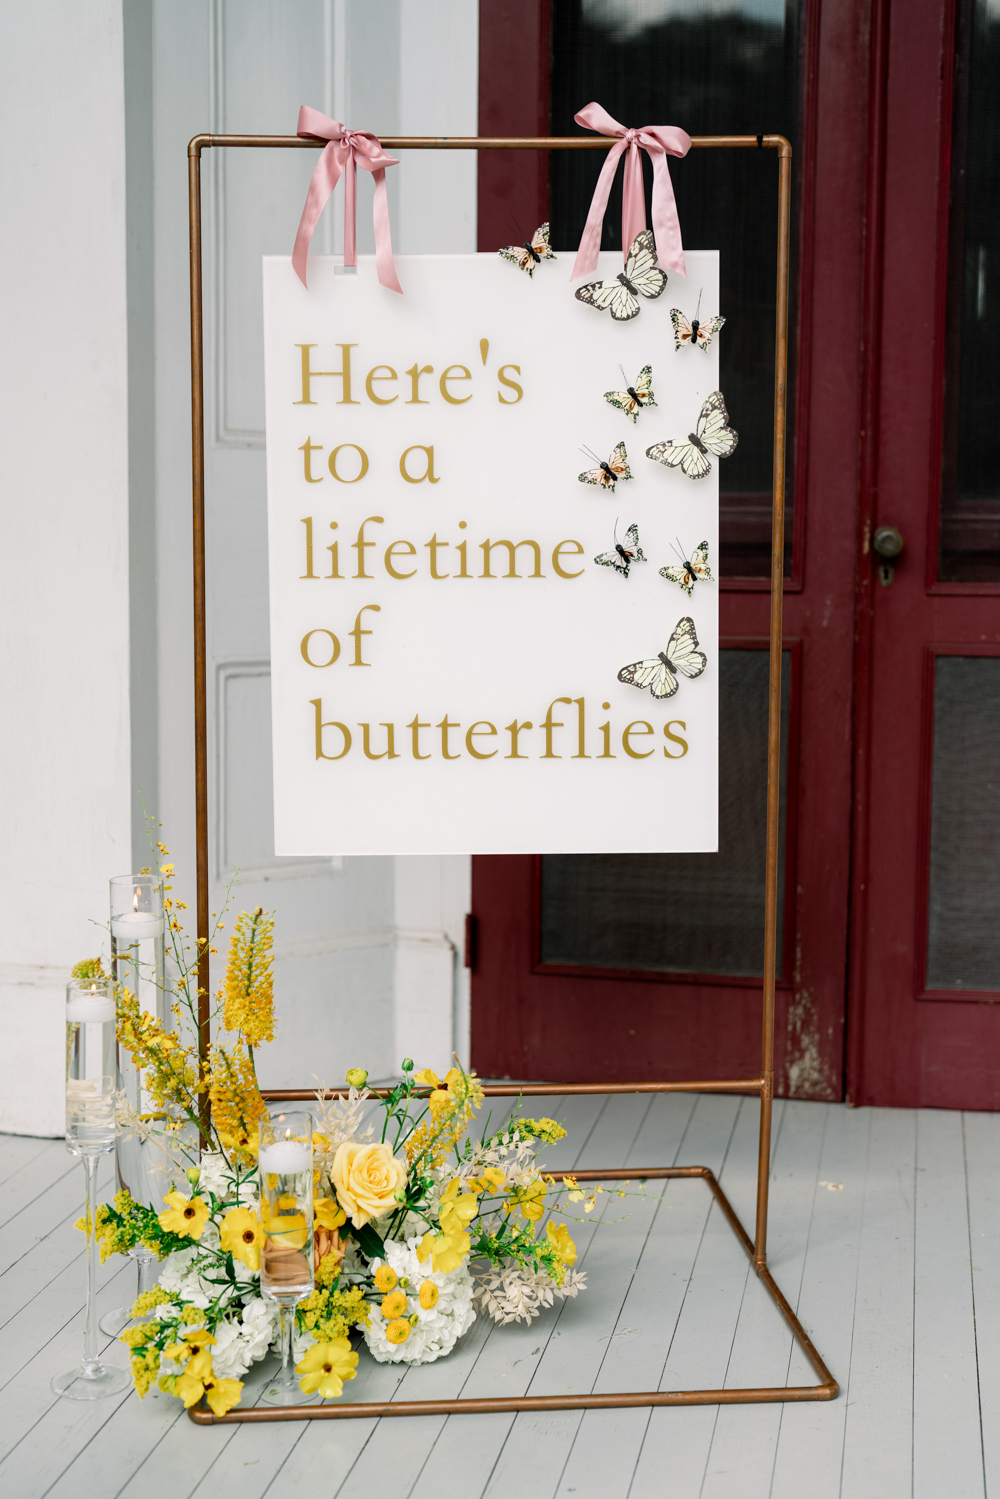 acrylic sign for wedding with gold lettering reading "Here's to a lifetime of butterflies"